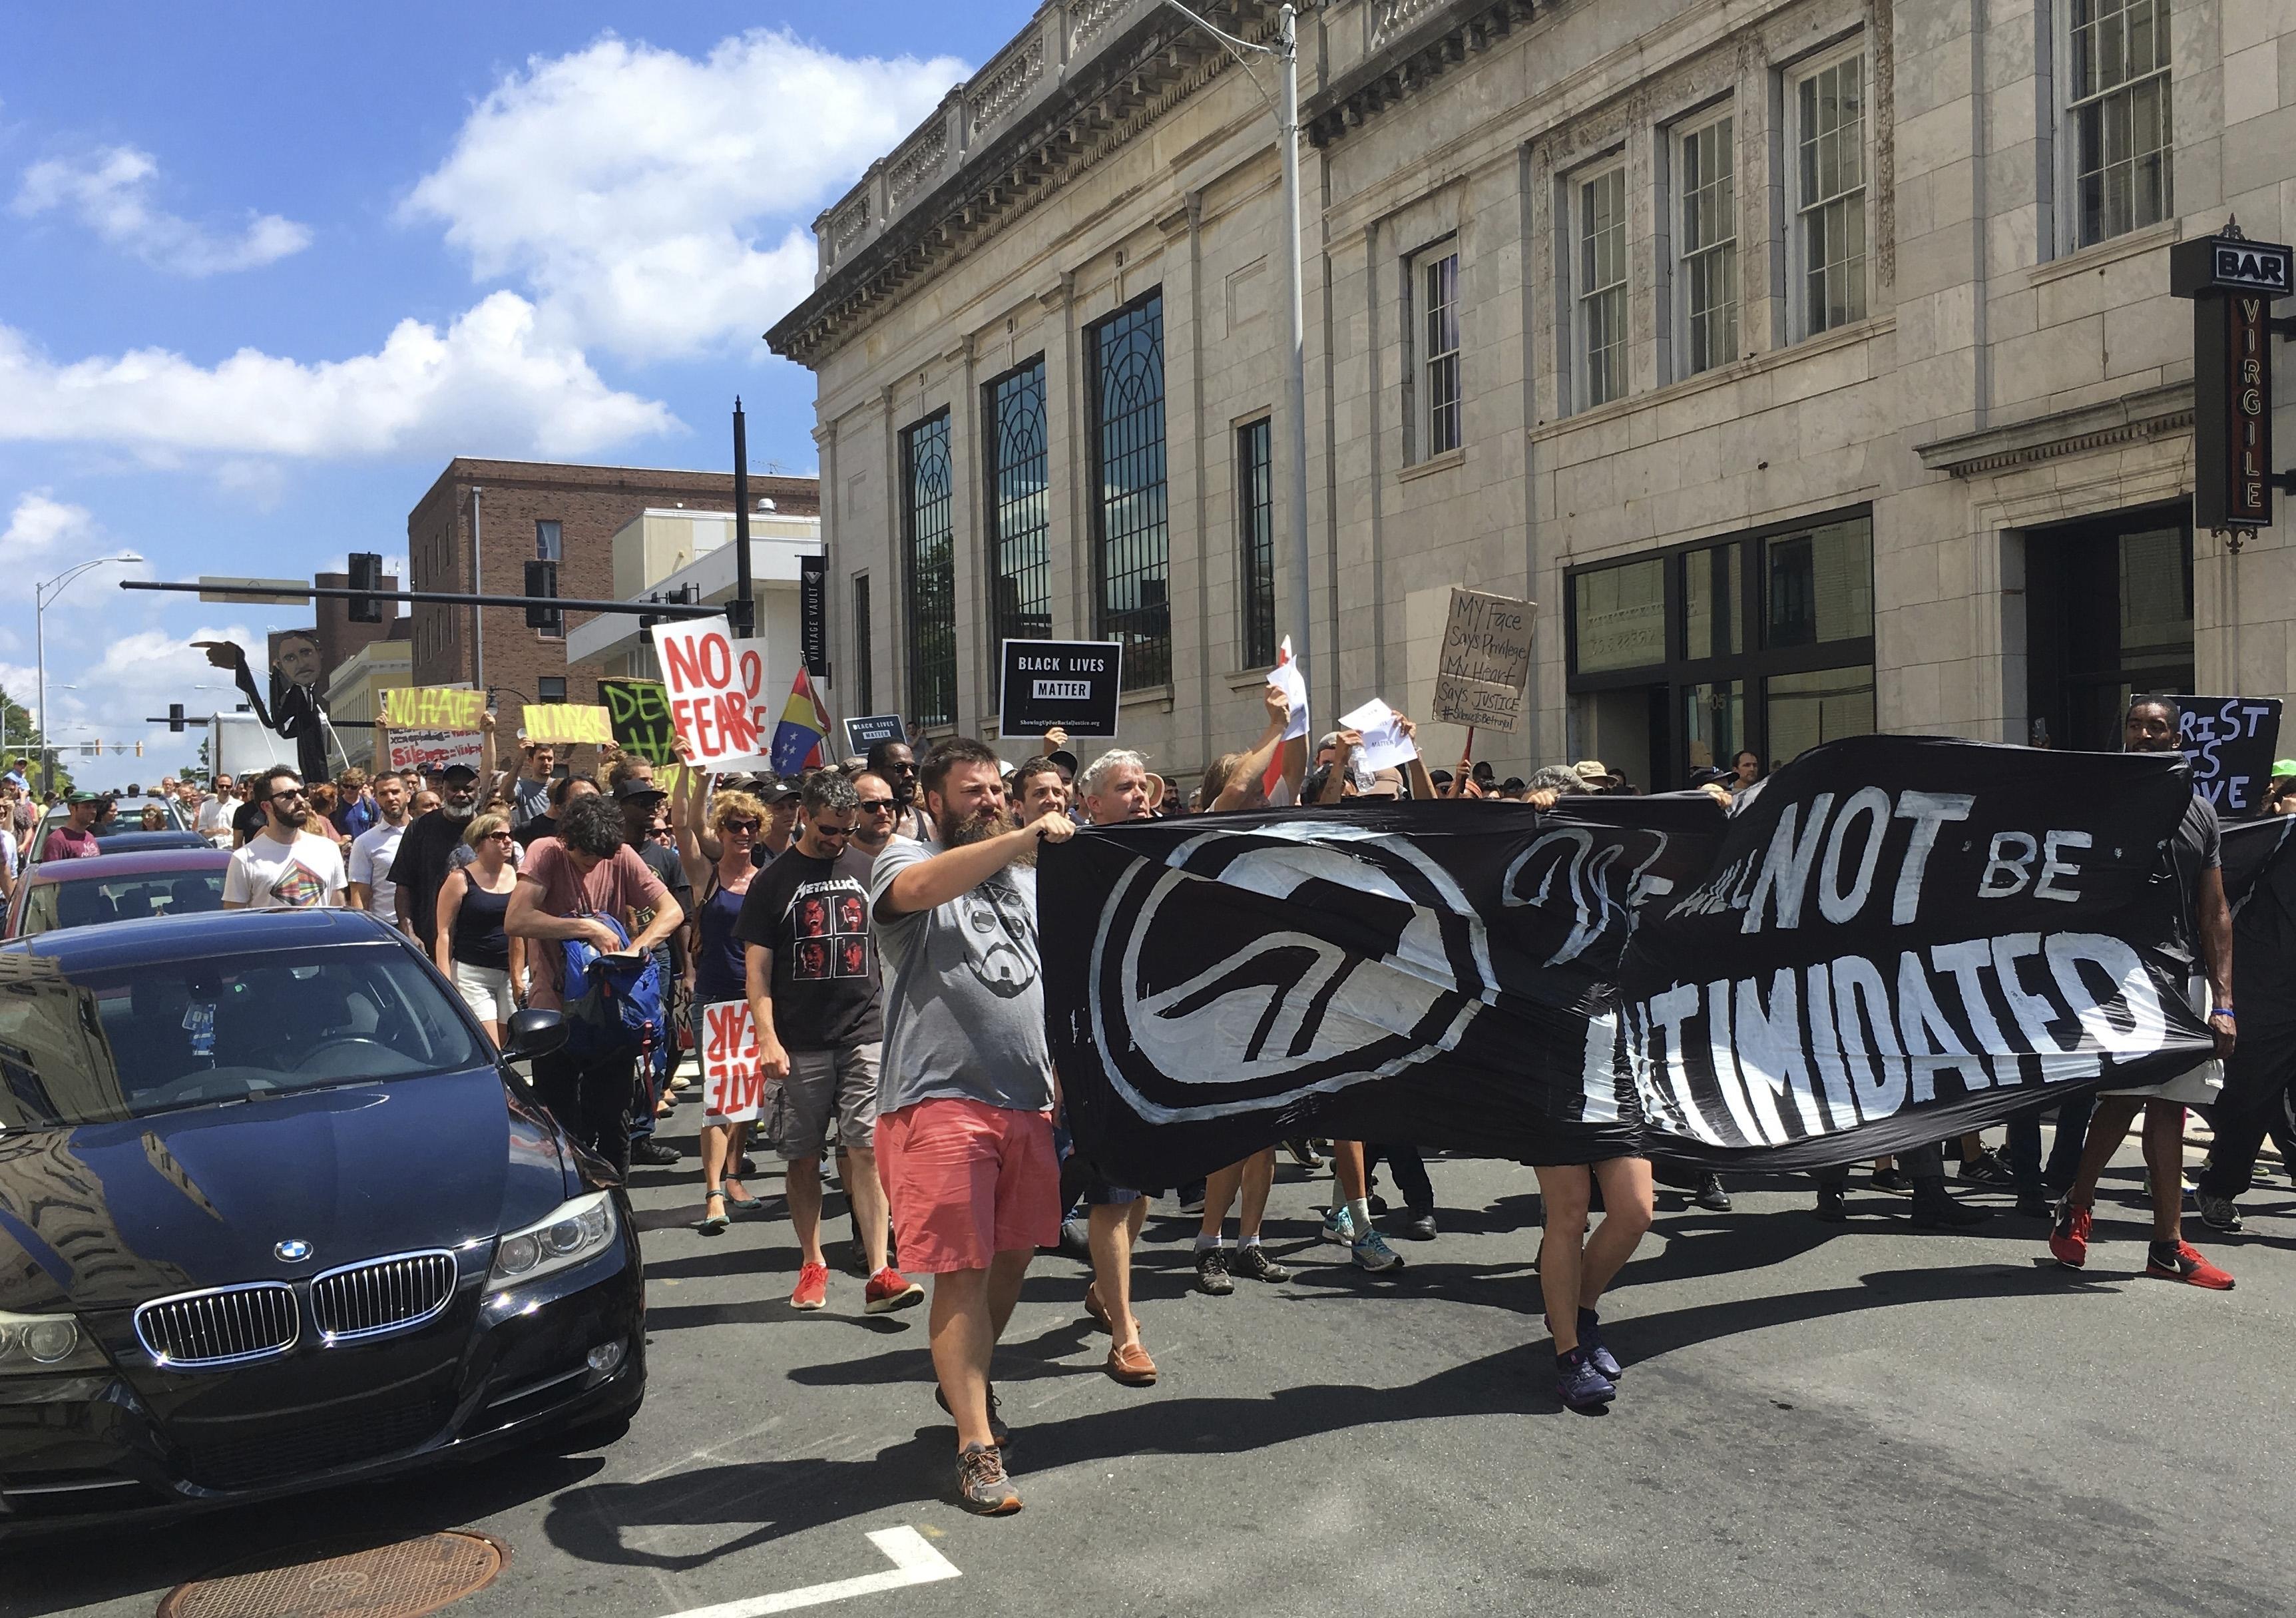 Antihate protesters march in Durham, North Carolina, after KKK rally